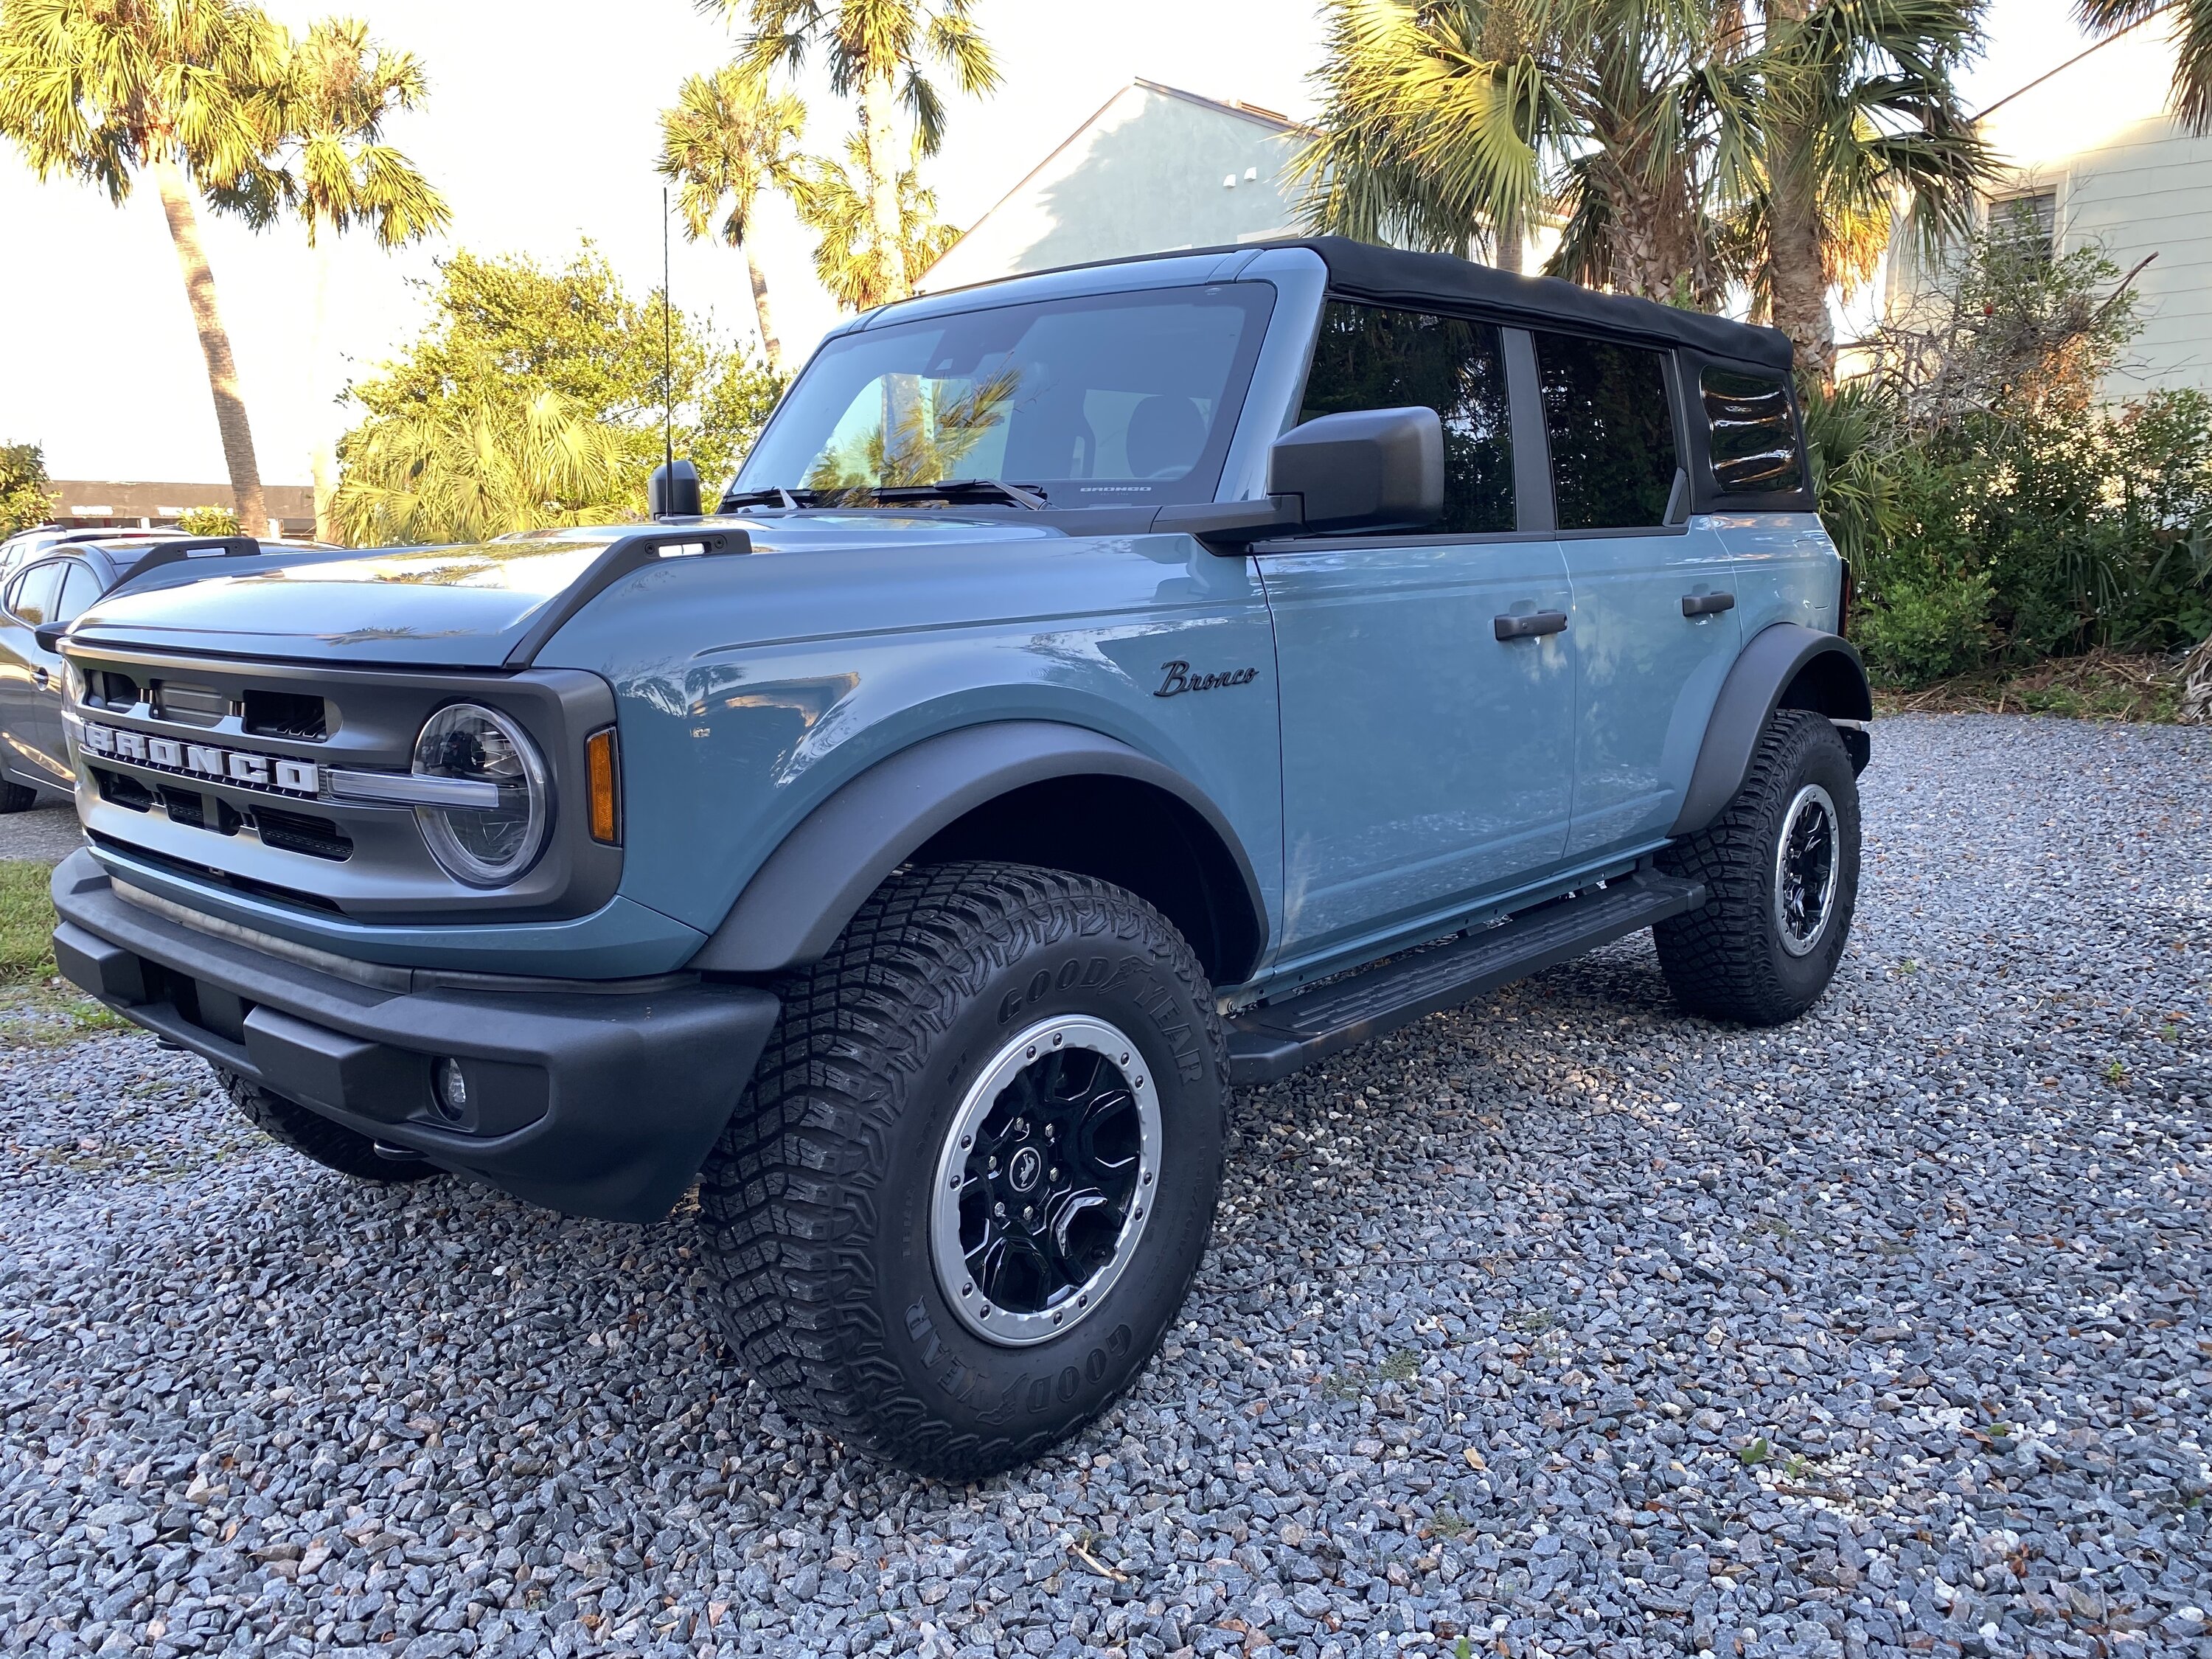 Ford Bronco PRICE LOWERED 2021 Ford Bronco - PERFECT Condition; 5000 miles; Sasquatch Package, LED Signature Lights, Technology, etc Front Side